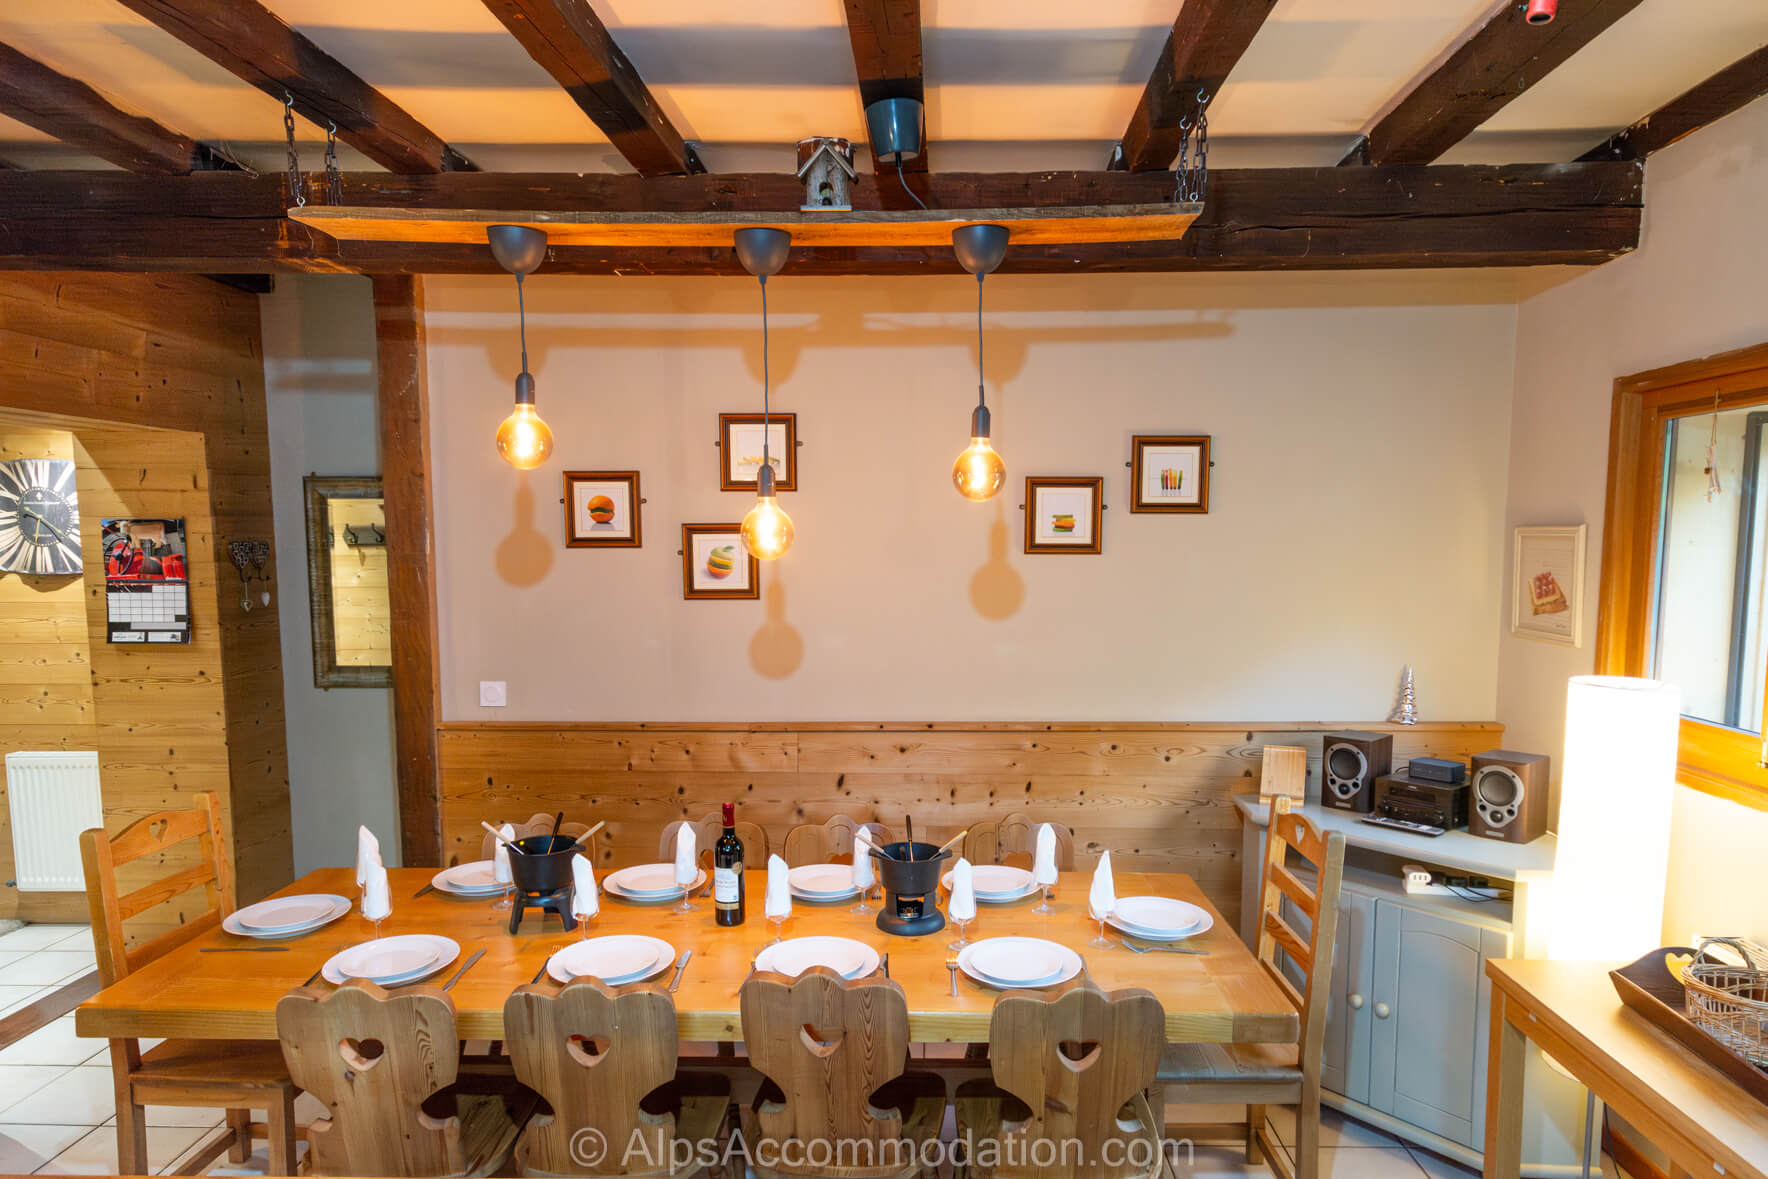 Maison Deux Coeurs Samoëns - The spacious and convivial kitchen and dining area